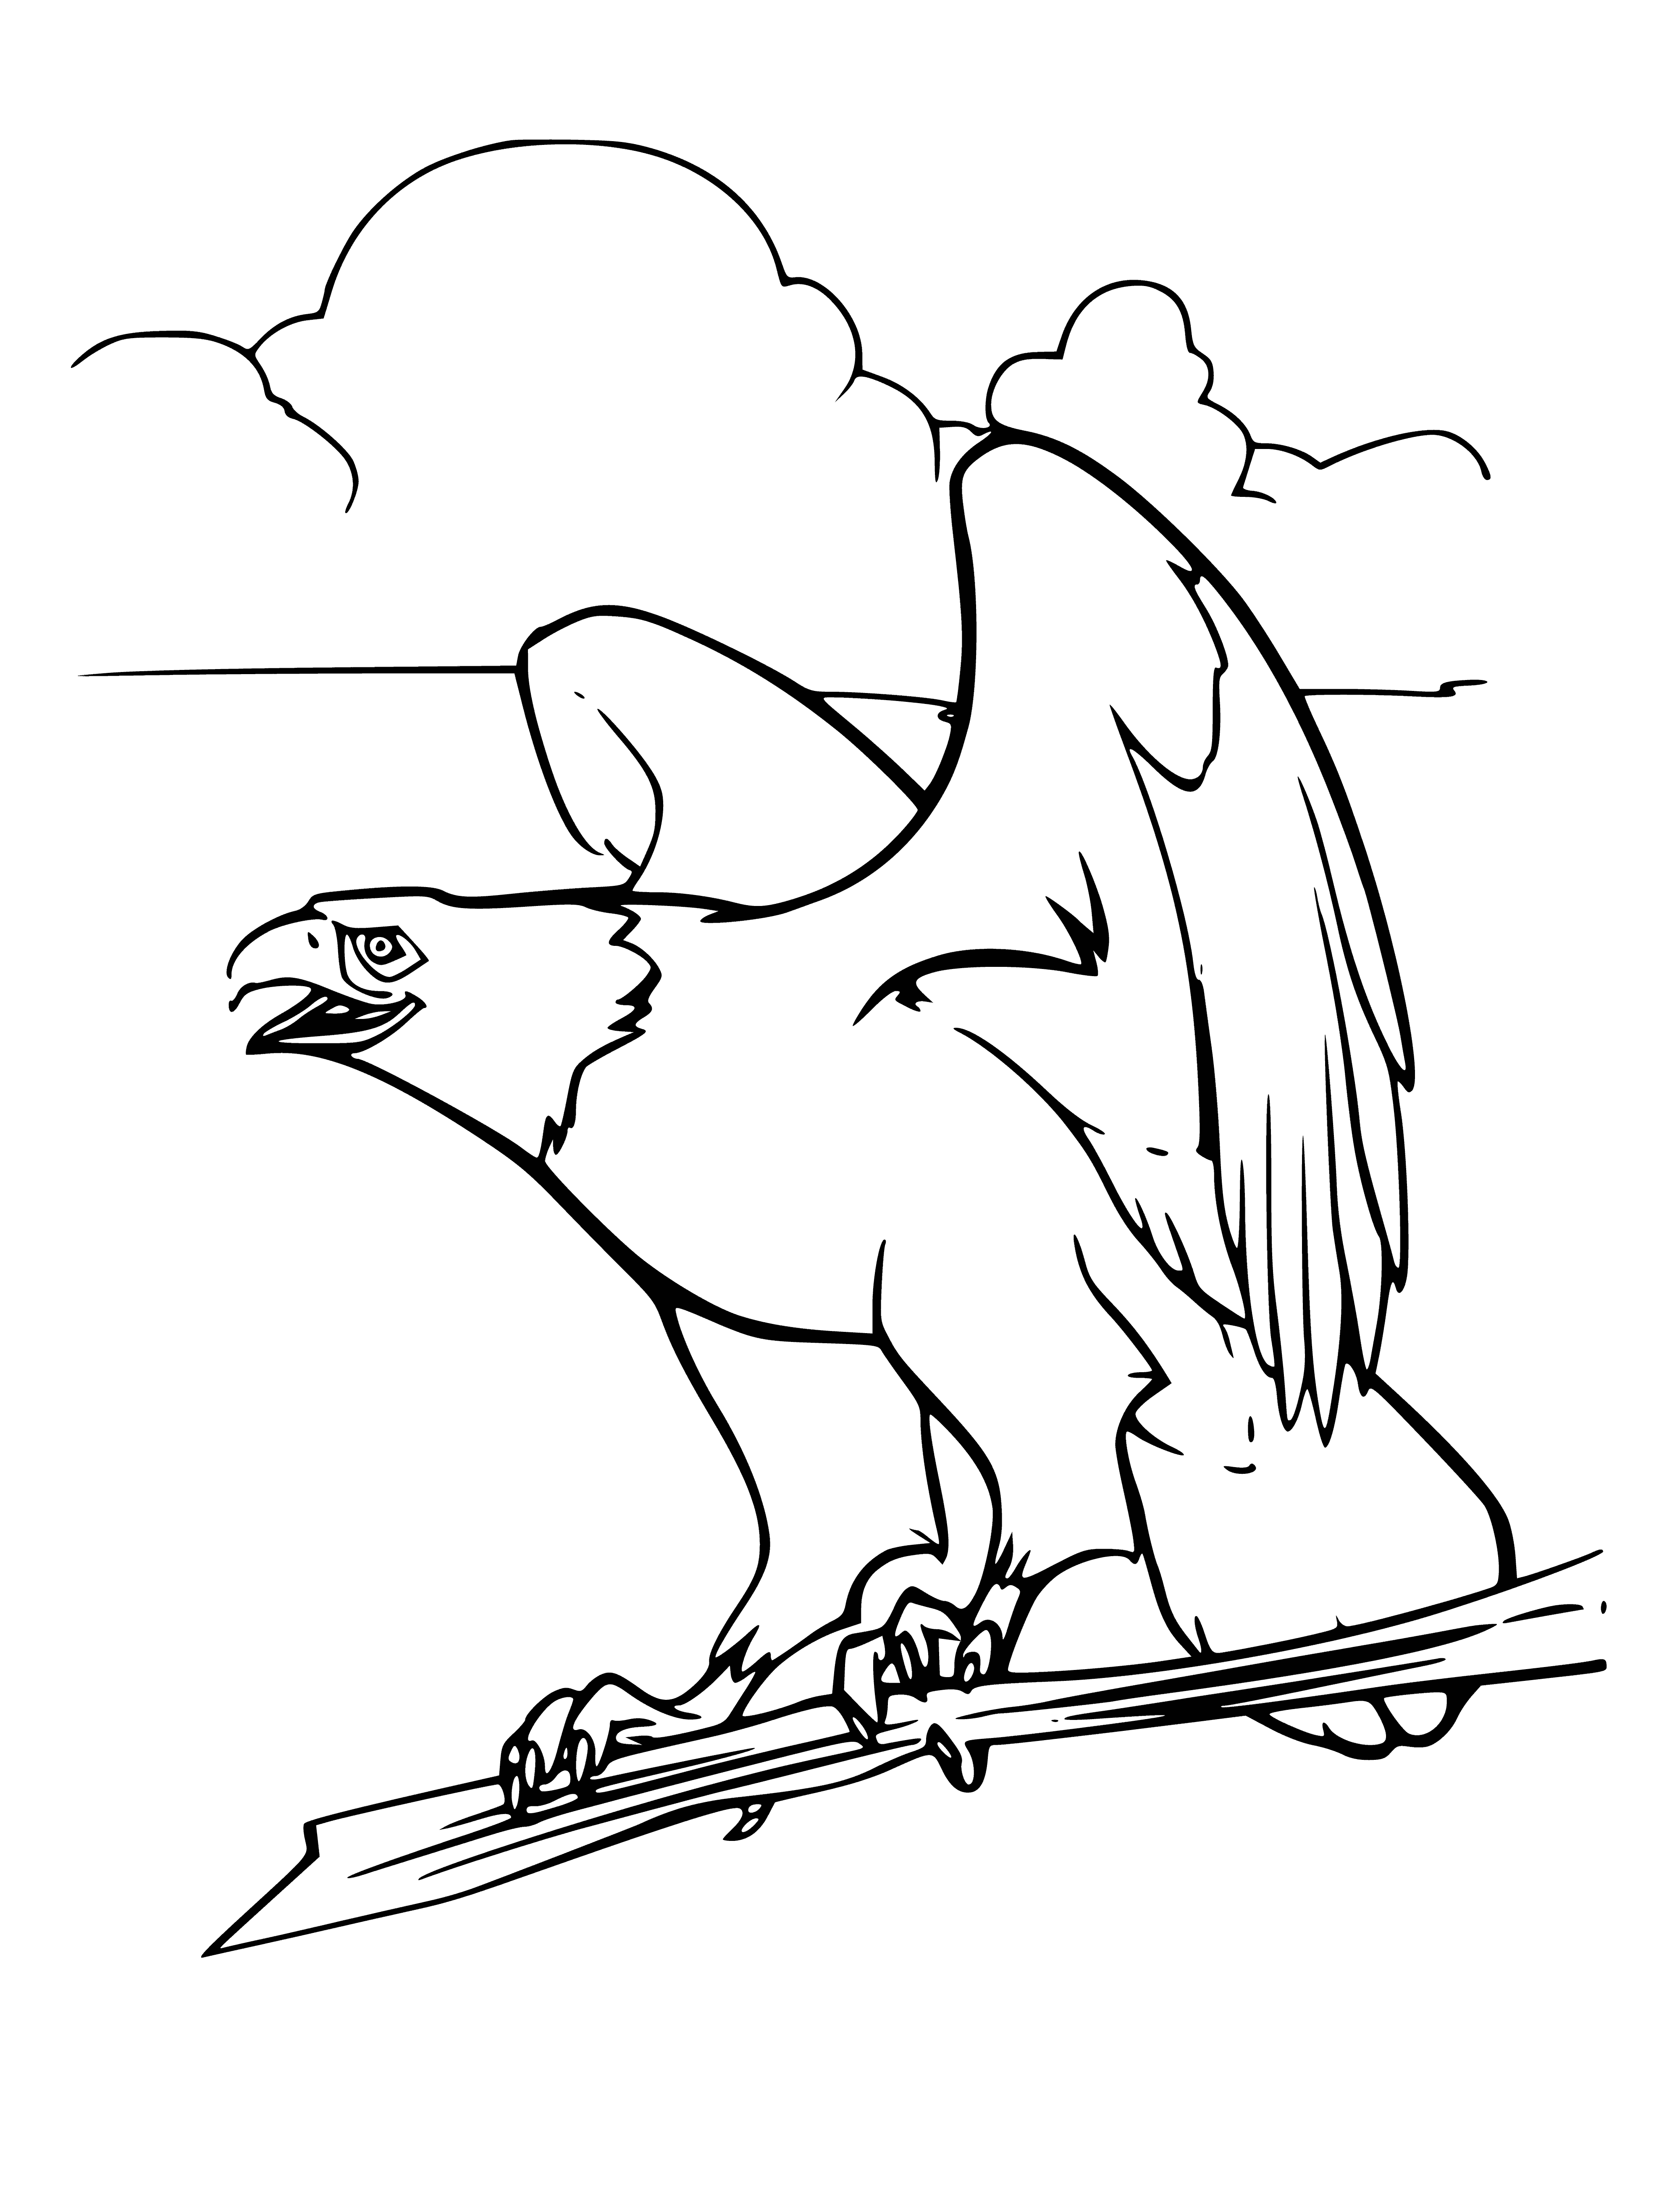 Eagle - a friend of Spirit coloring page